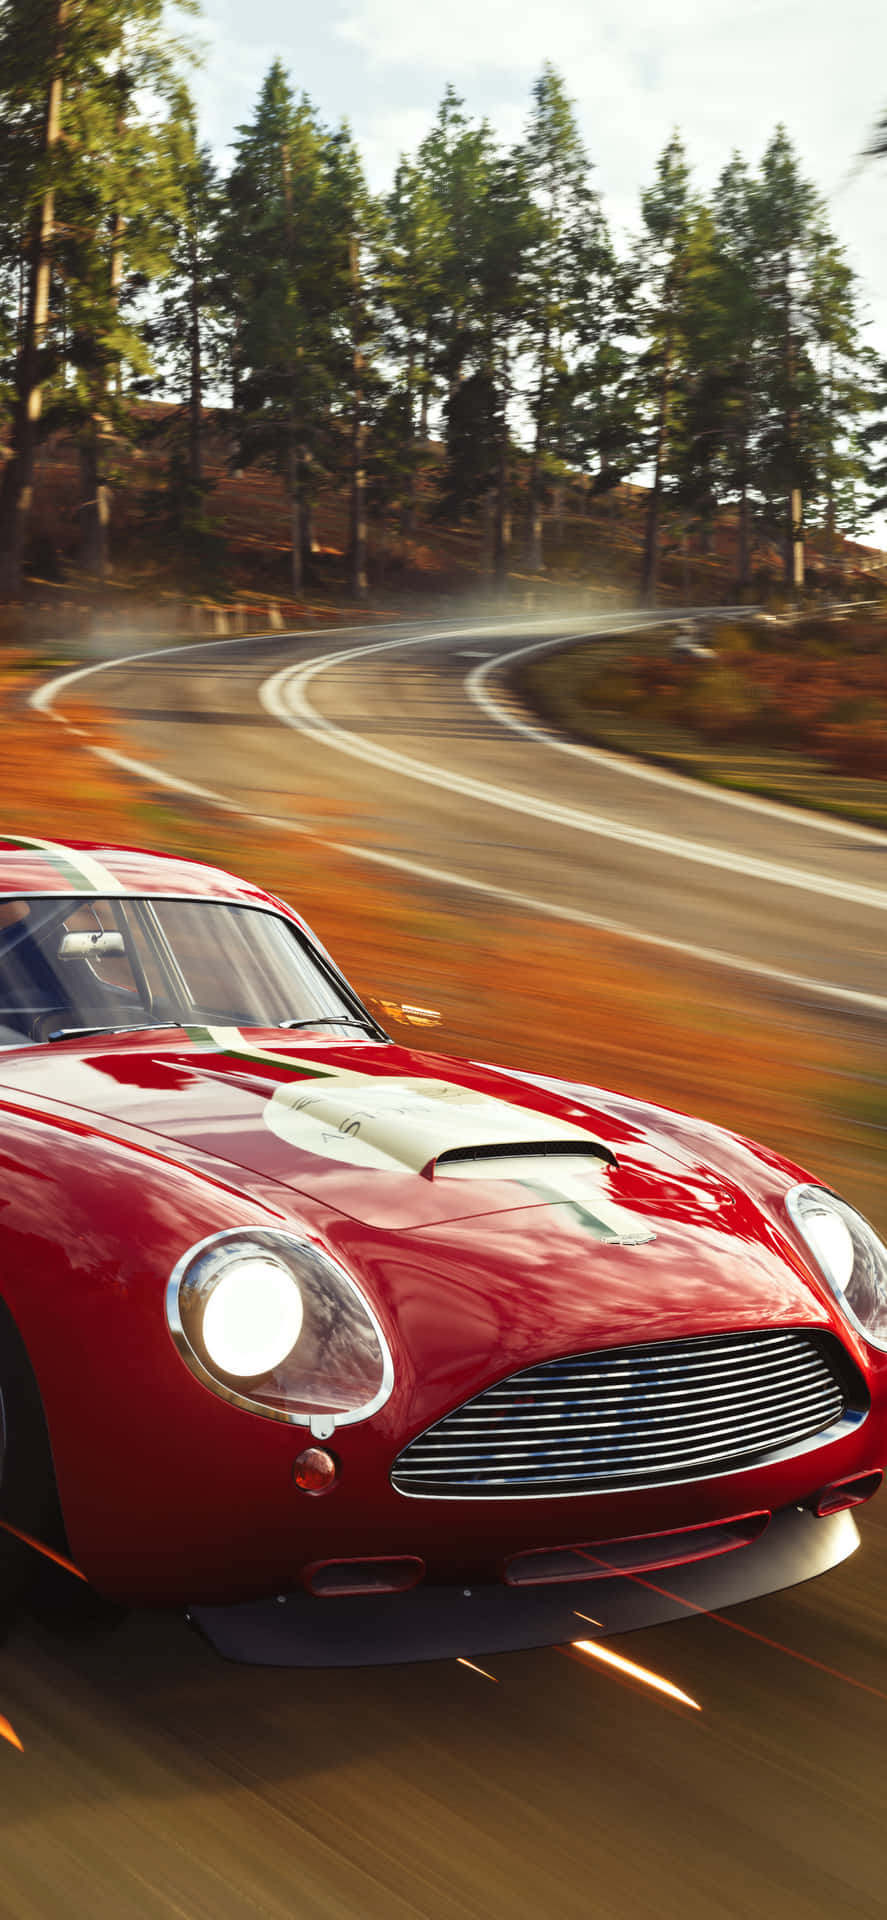 Blaze a Trail With Iphone X and Forza Horizon 4